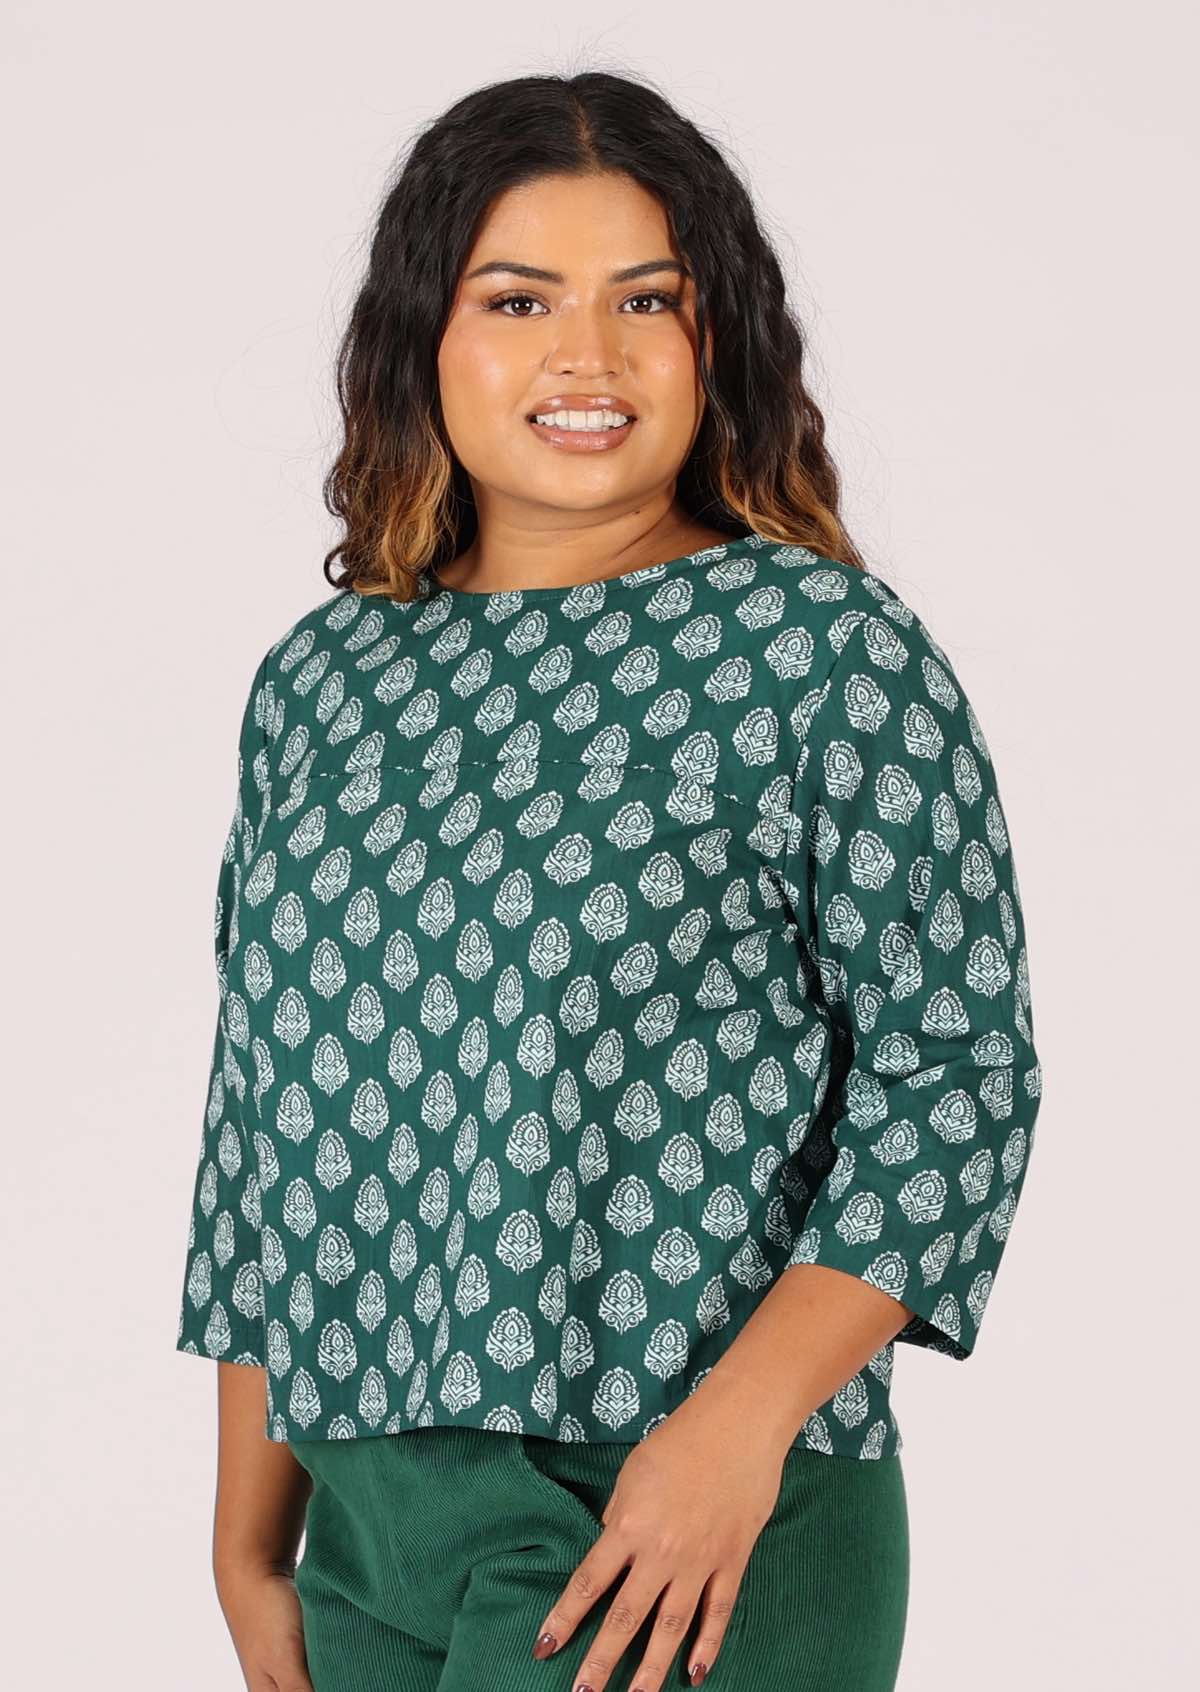 Relaxed fit cotton top with pendant print on dark green base